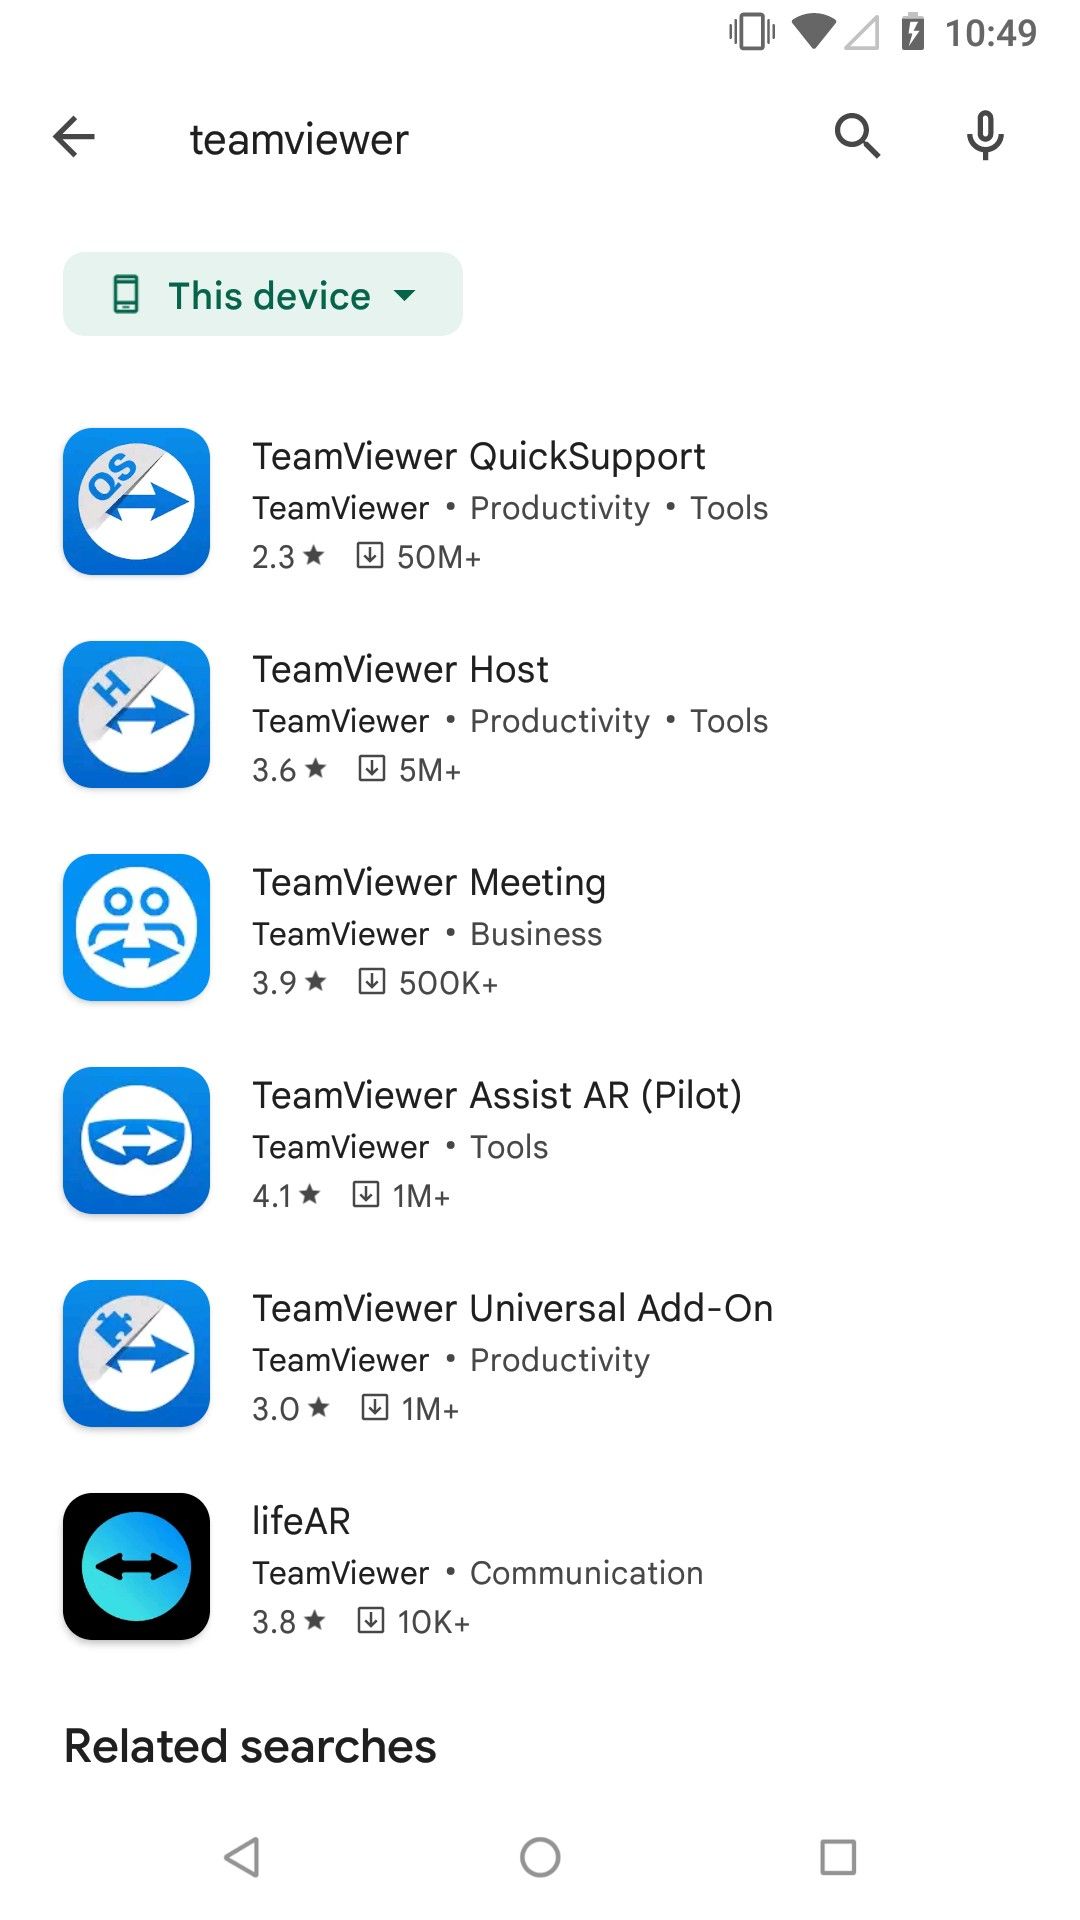 A list of TeamViewer-branded apps on Google Play